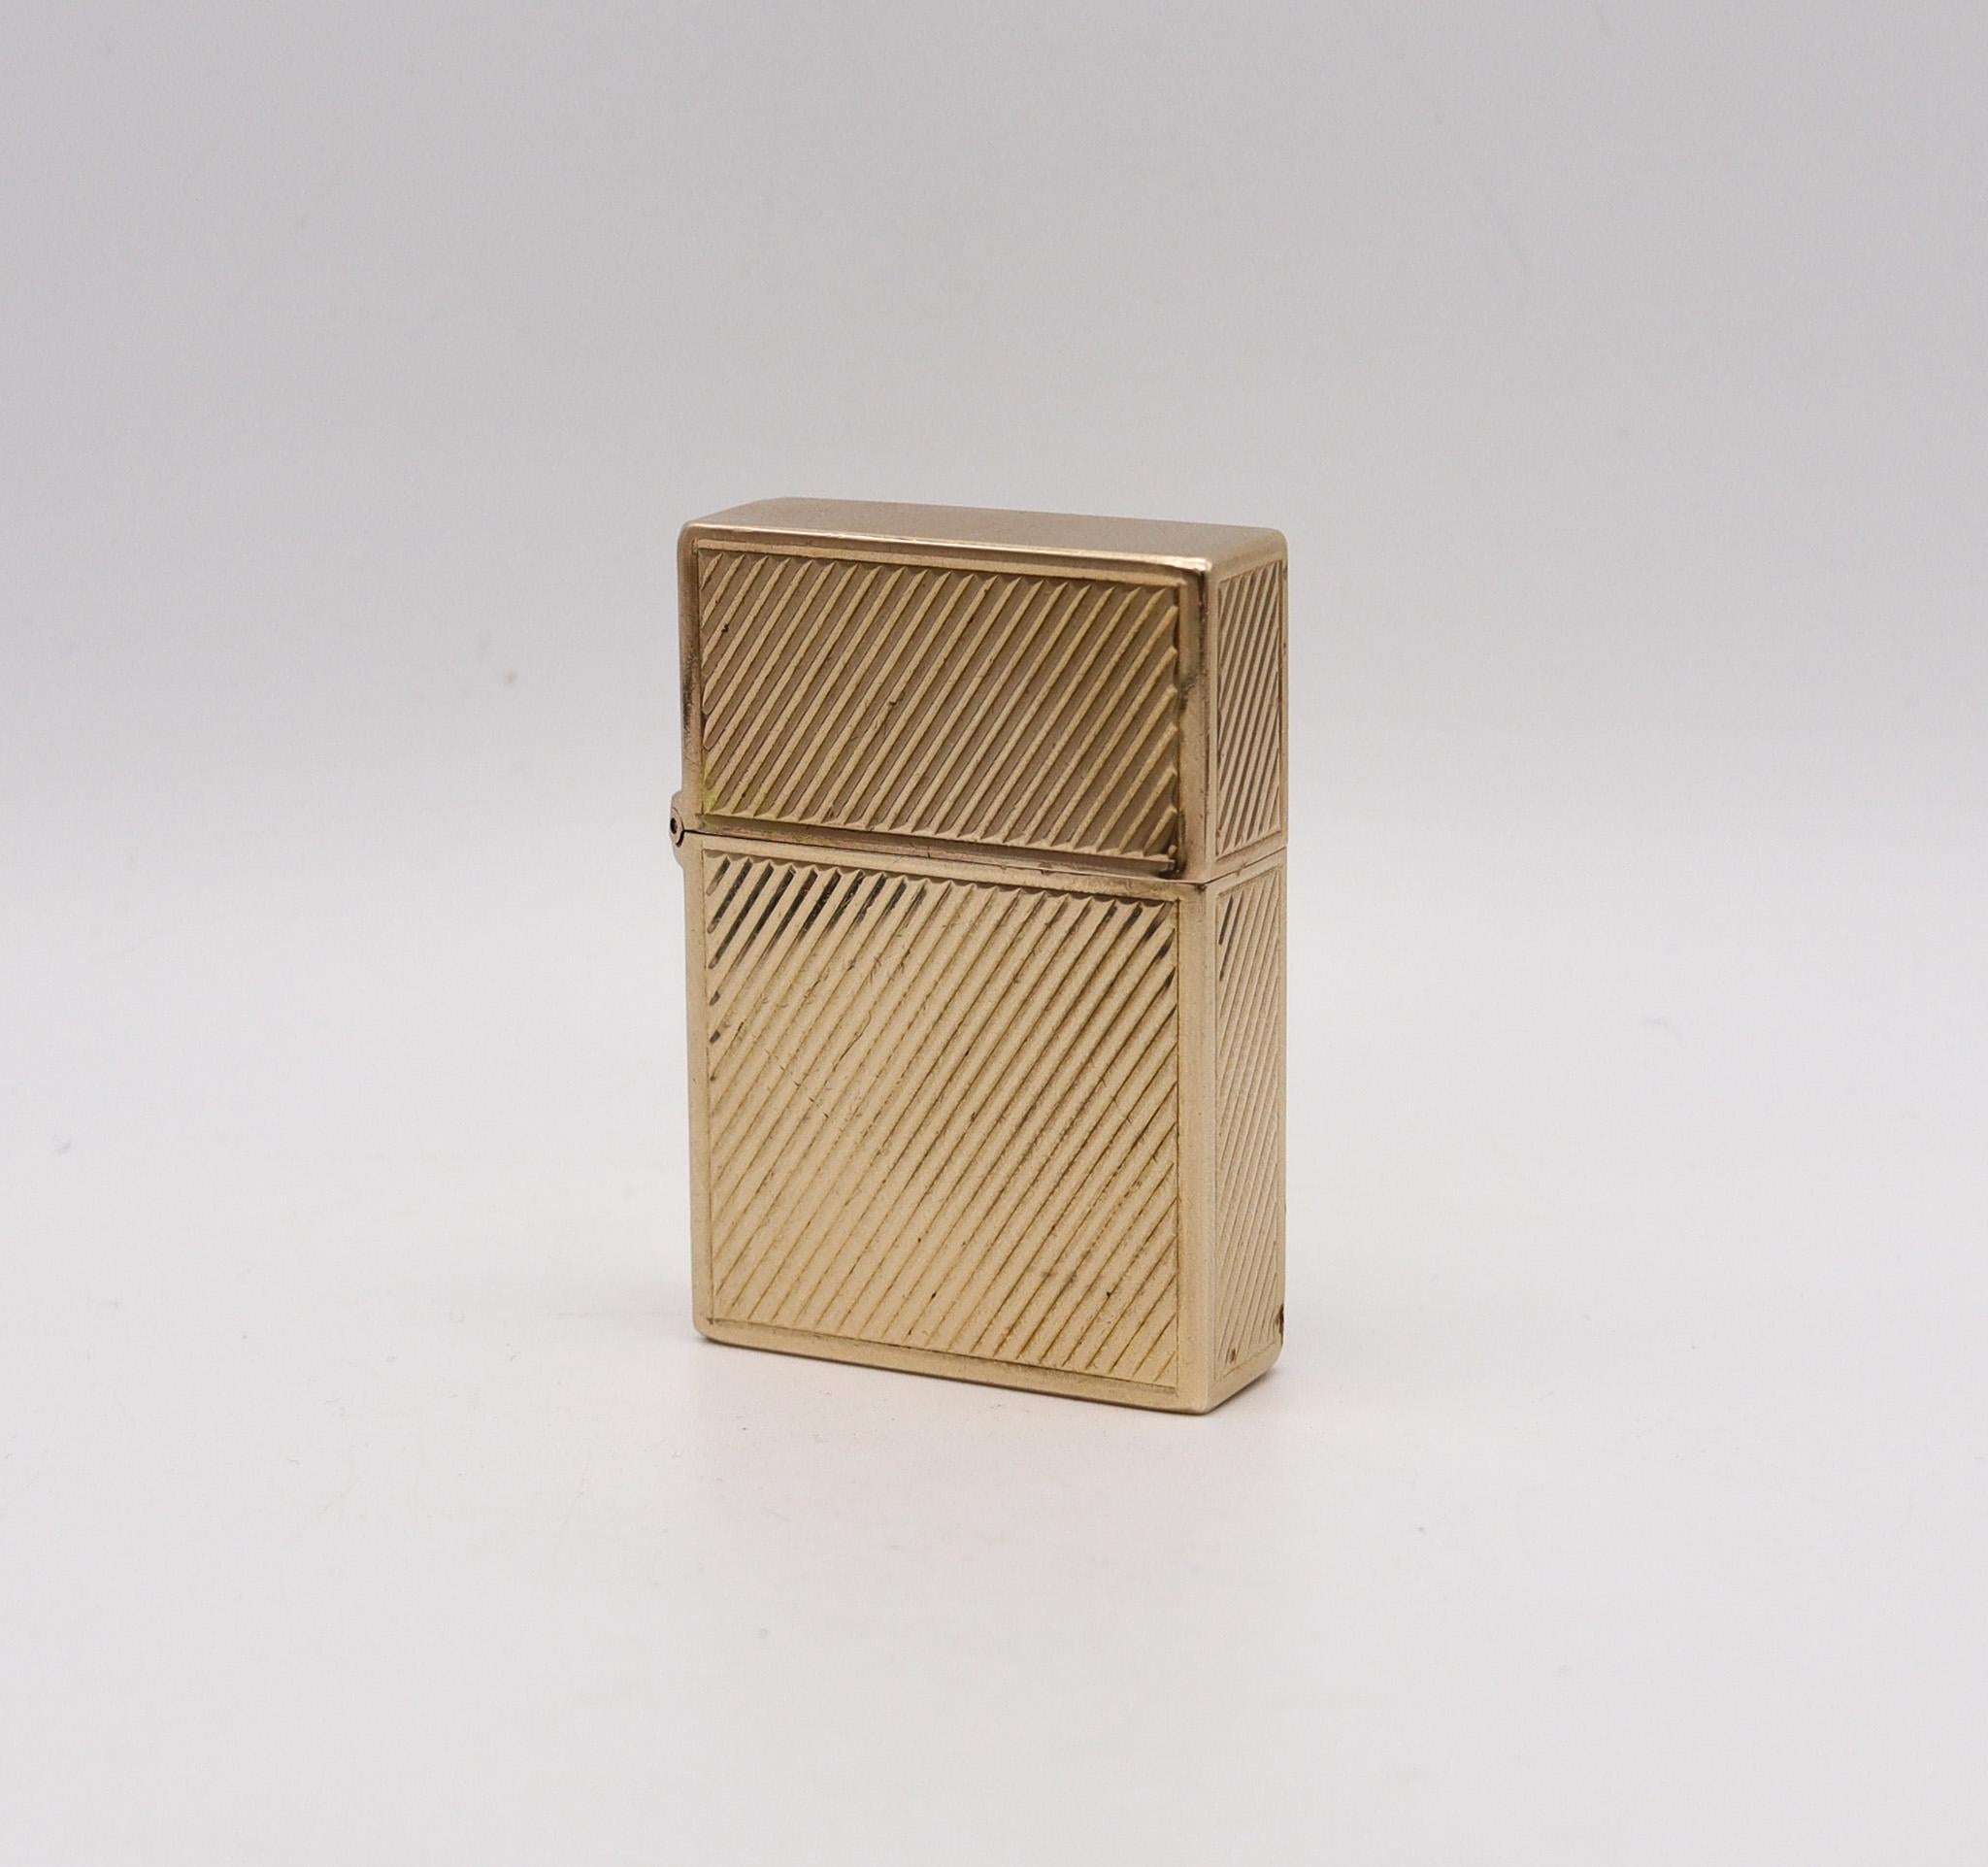 Pocket lighter designed by Tiffany & Co.

Gorgeous luxury pocket lighter, created in New York city by Tiffany & Co, back in the 1960. The lighter's case has been crafted with sharp geometric shapes in solid yellow gold of 14 karats and decorated